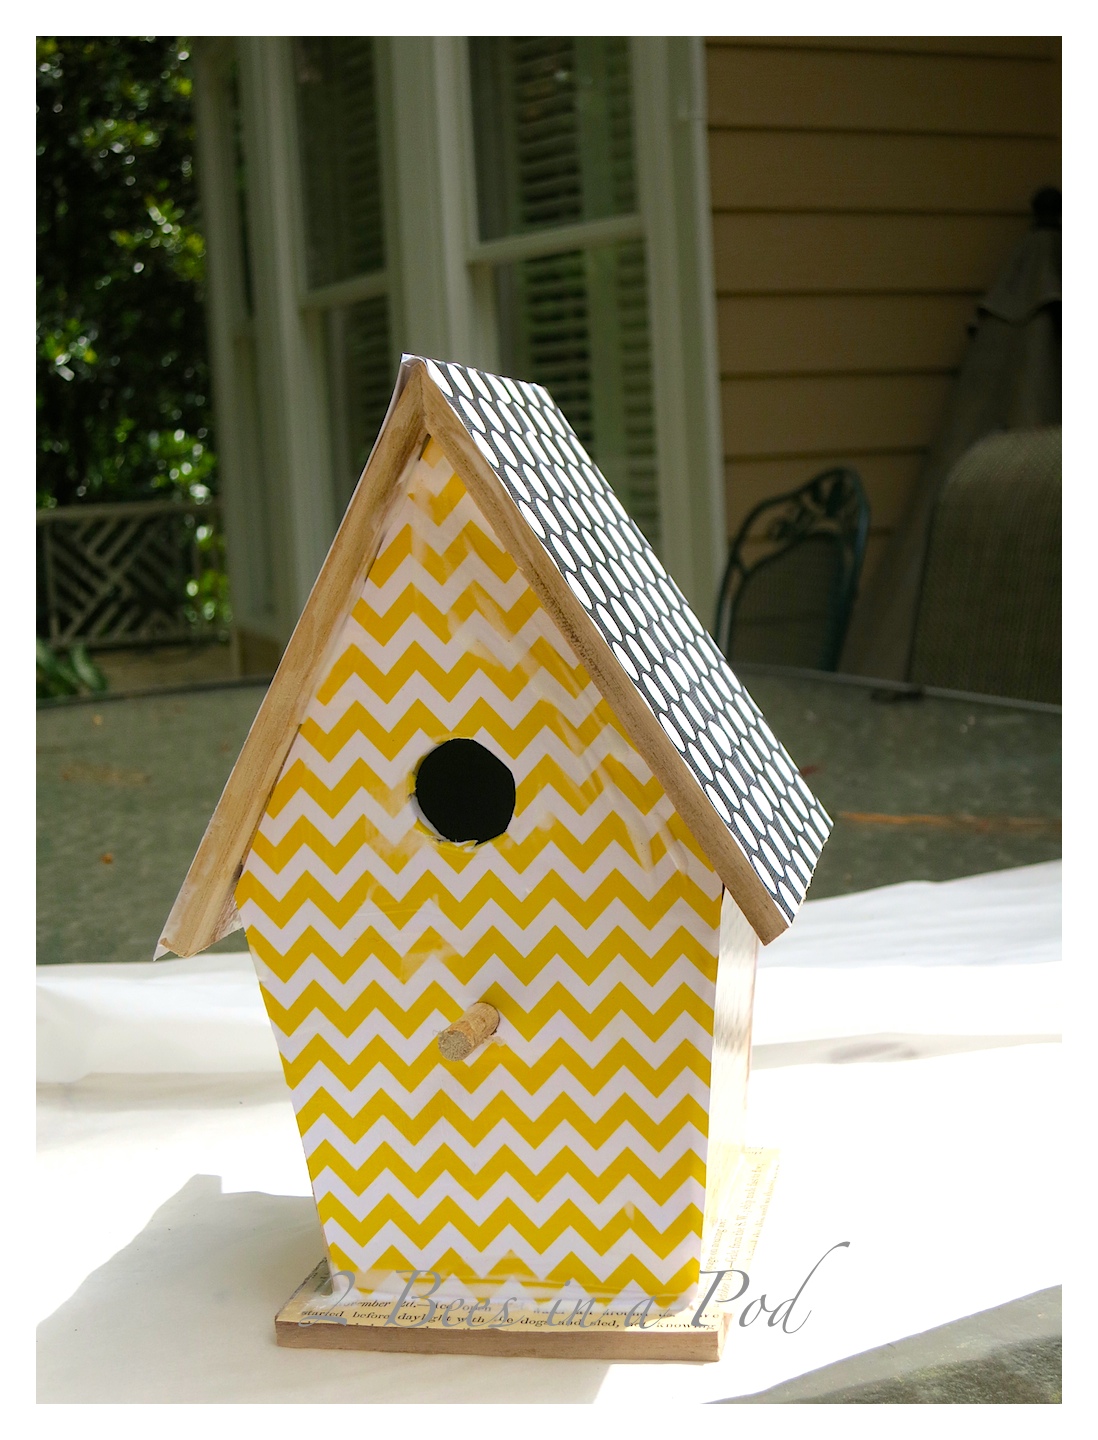 Create a decorative birdhouse. we usedd Mod Podge. scrapbook paper, antique book pages and a pre made birdhouse. For added decoration we made flowers from the antique book pages.